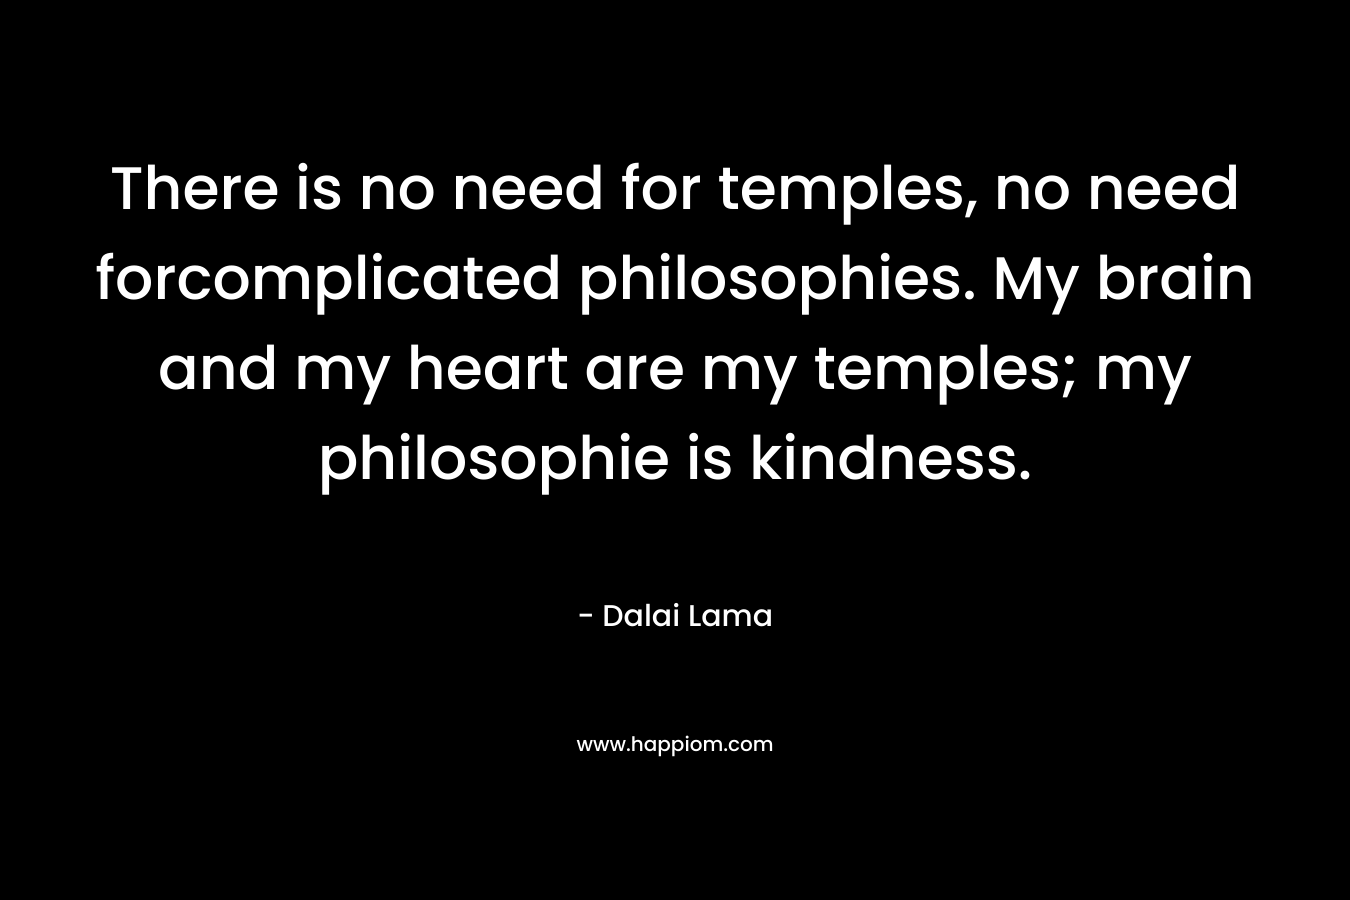 There is no need for temples, no need forcomplicated philosophies. My brain and my heart are my temples; my philosophie is kindness. – Dalai Lama